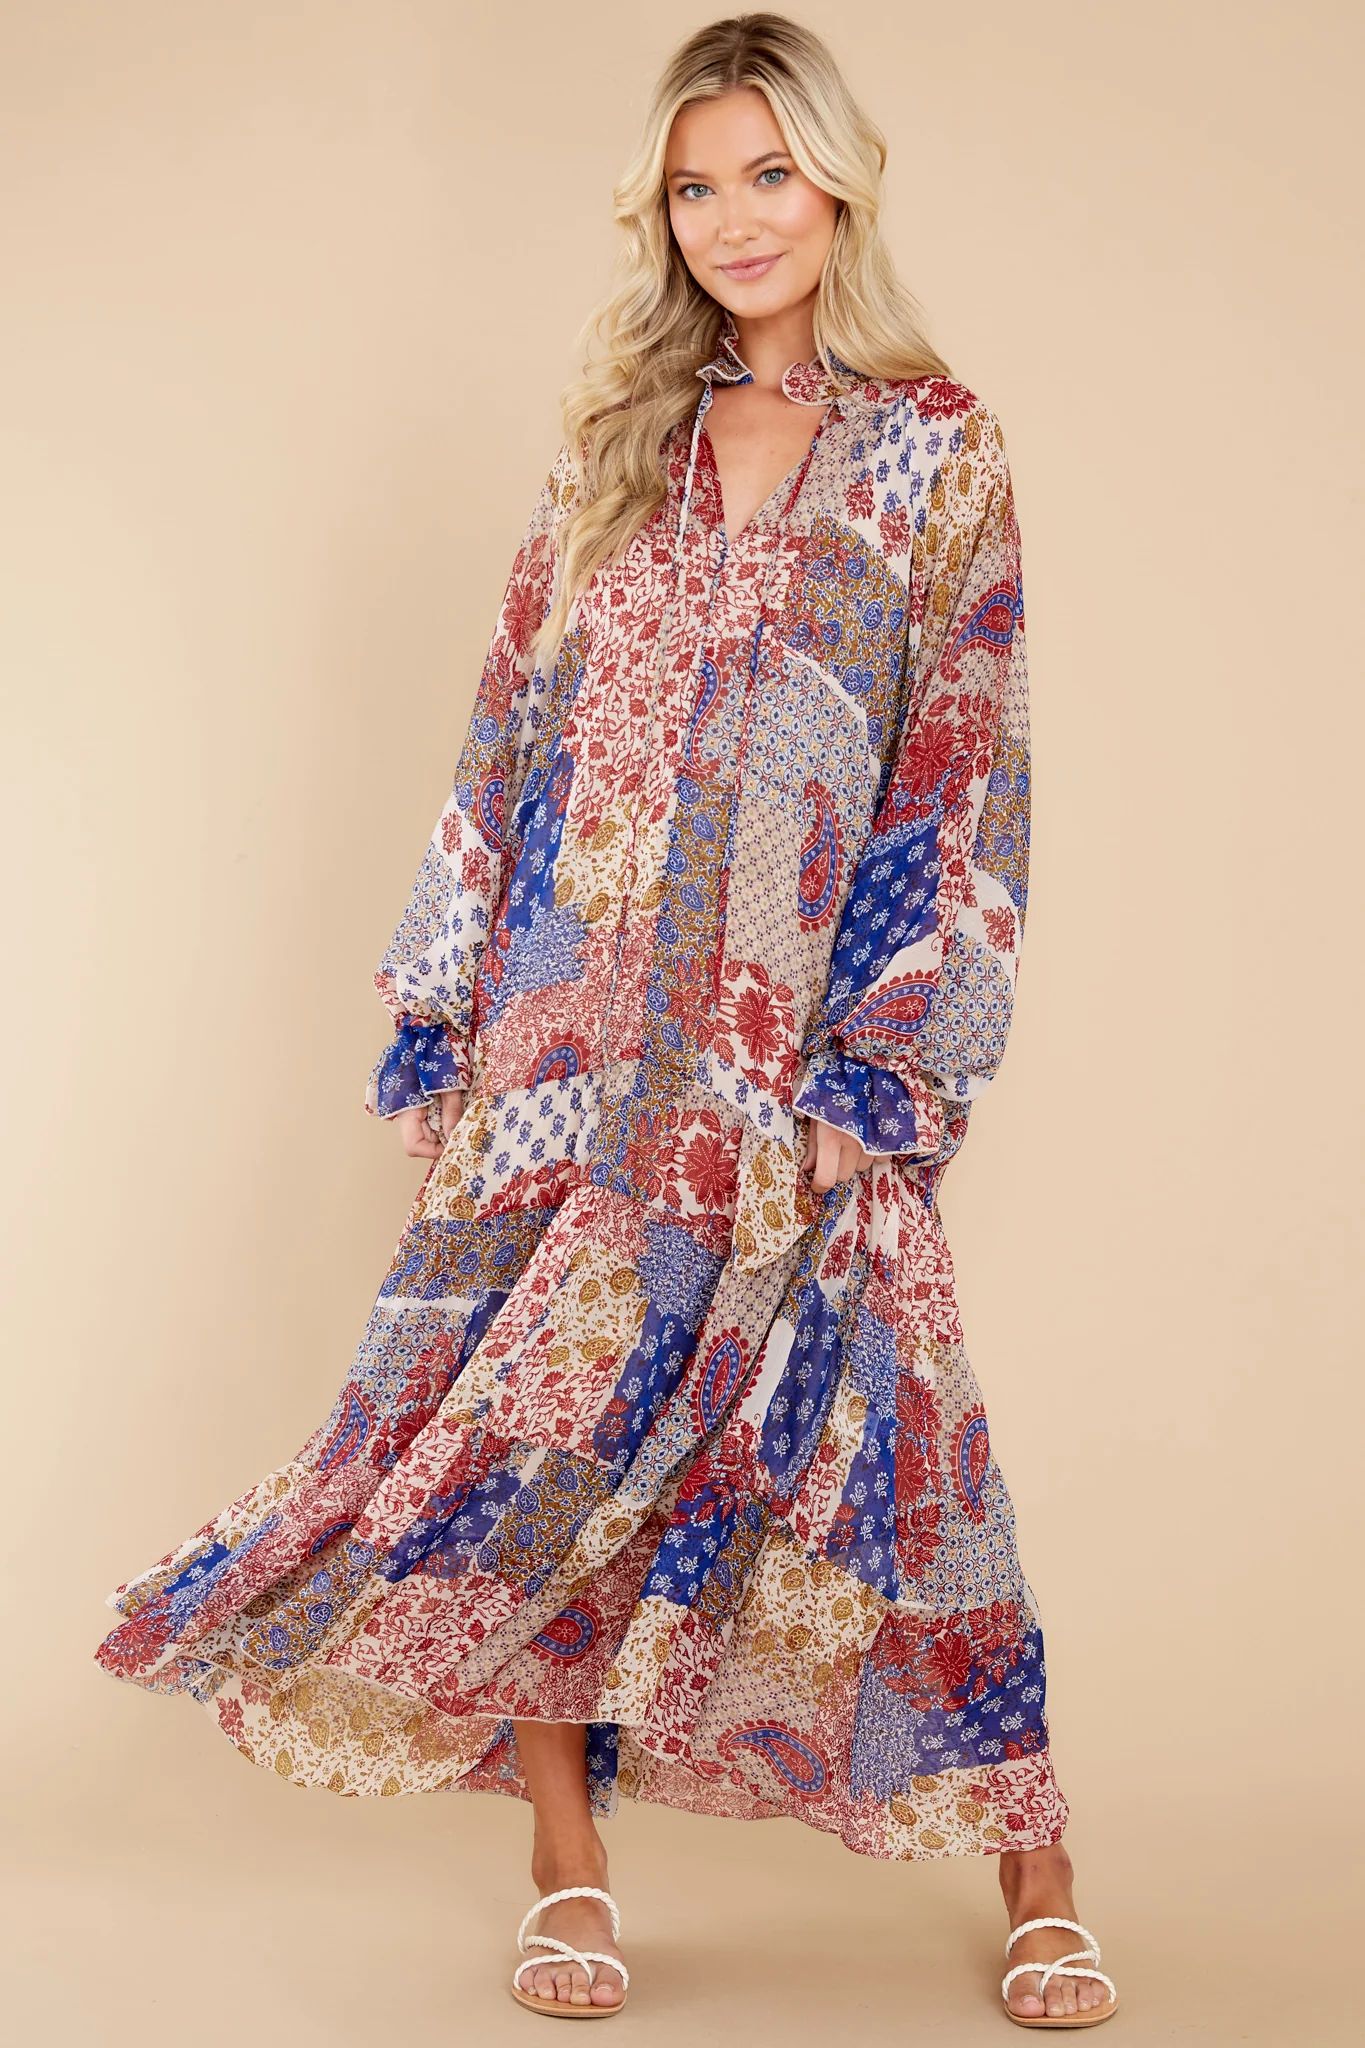 Head Over Feet Red And Blue Multi Print Cover Up Dress | Red Dress 